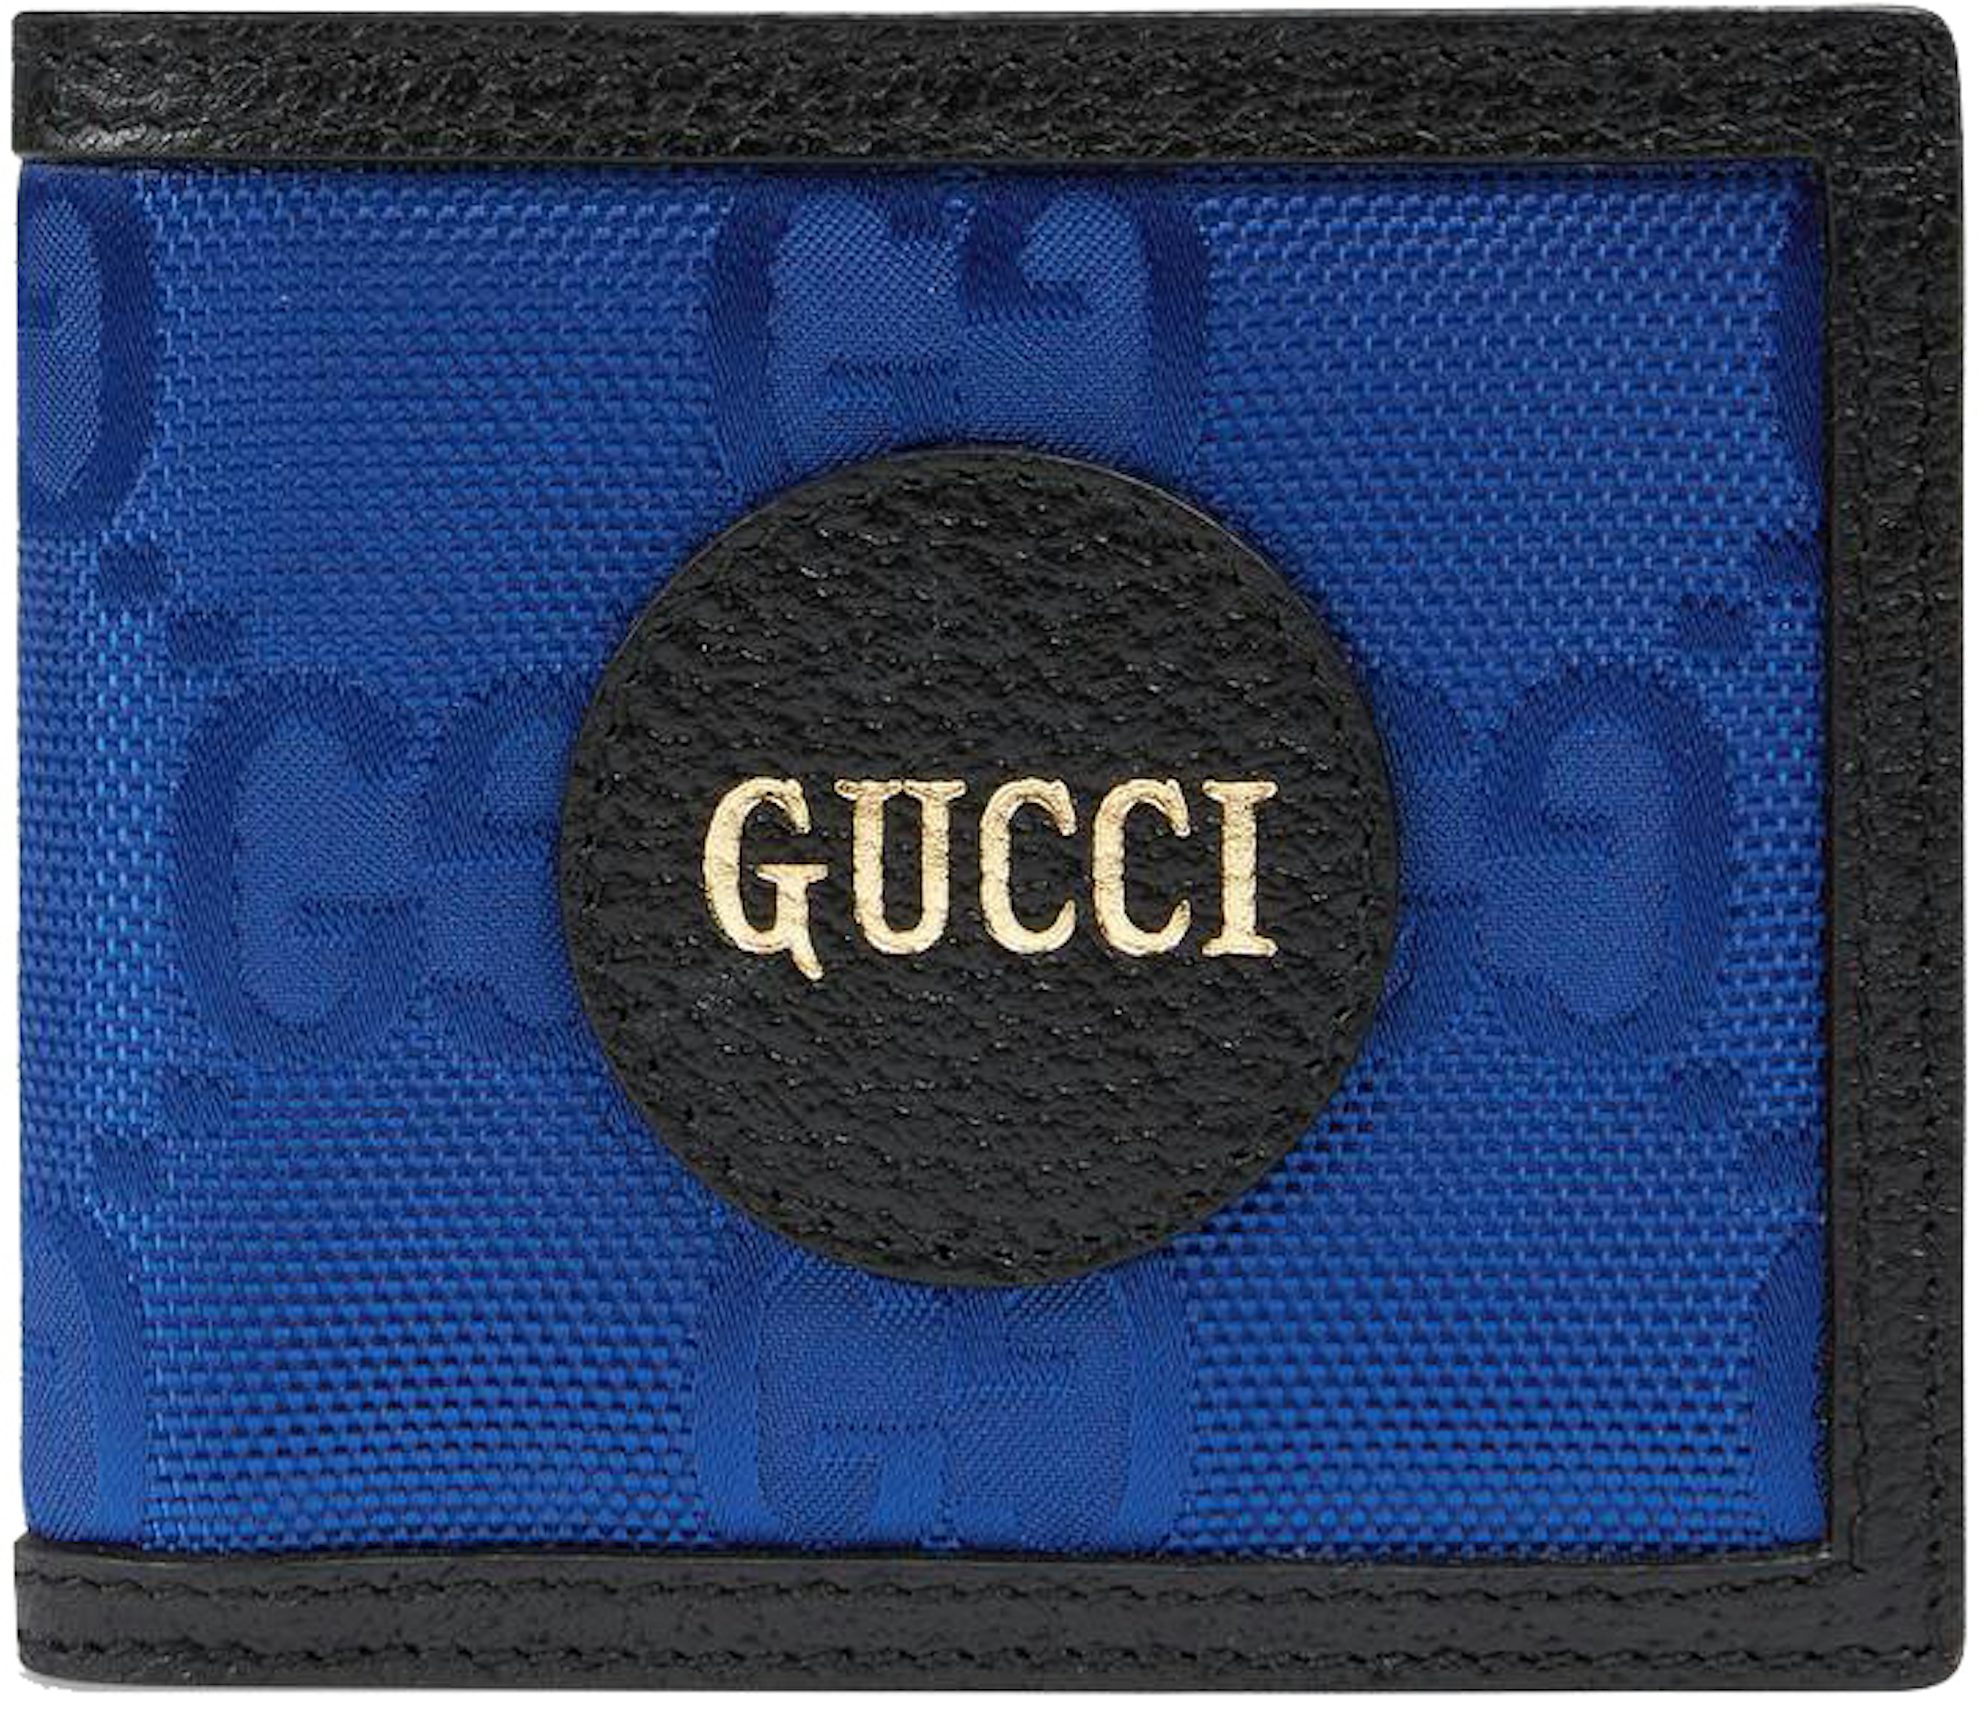 Gucci Off The Grid Billfold Wallet Blue